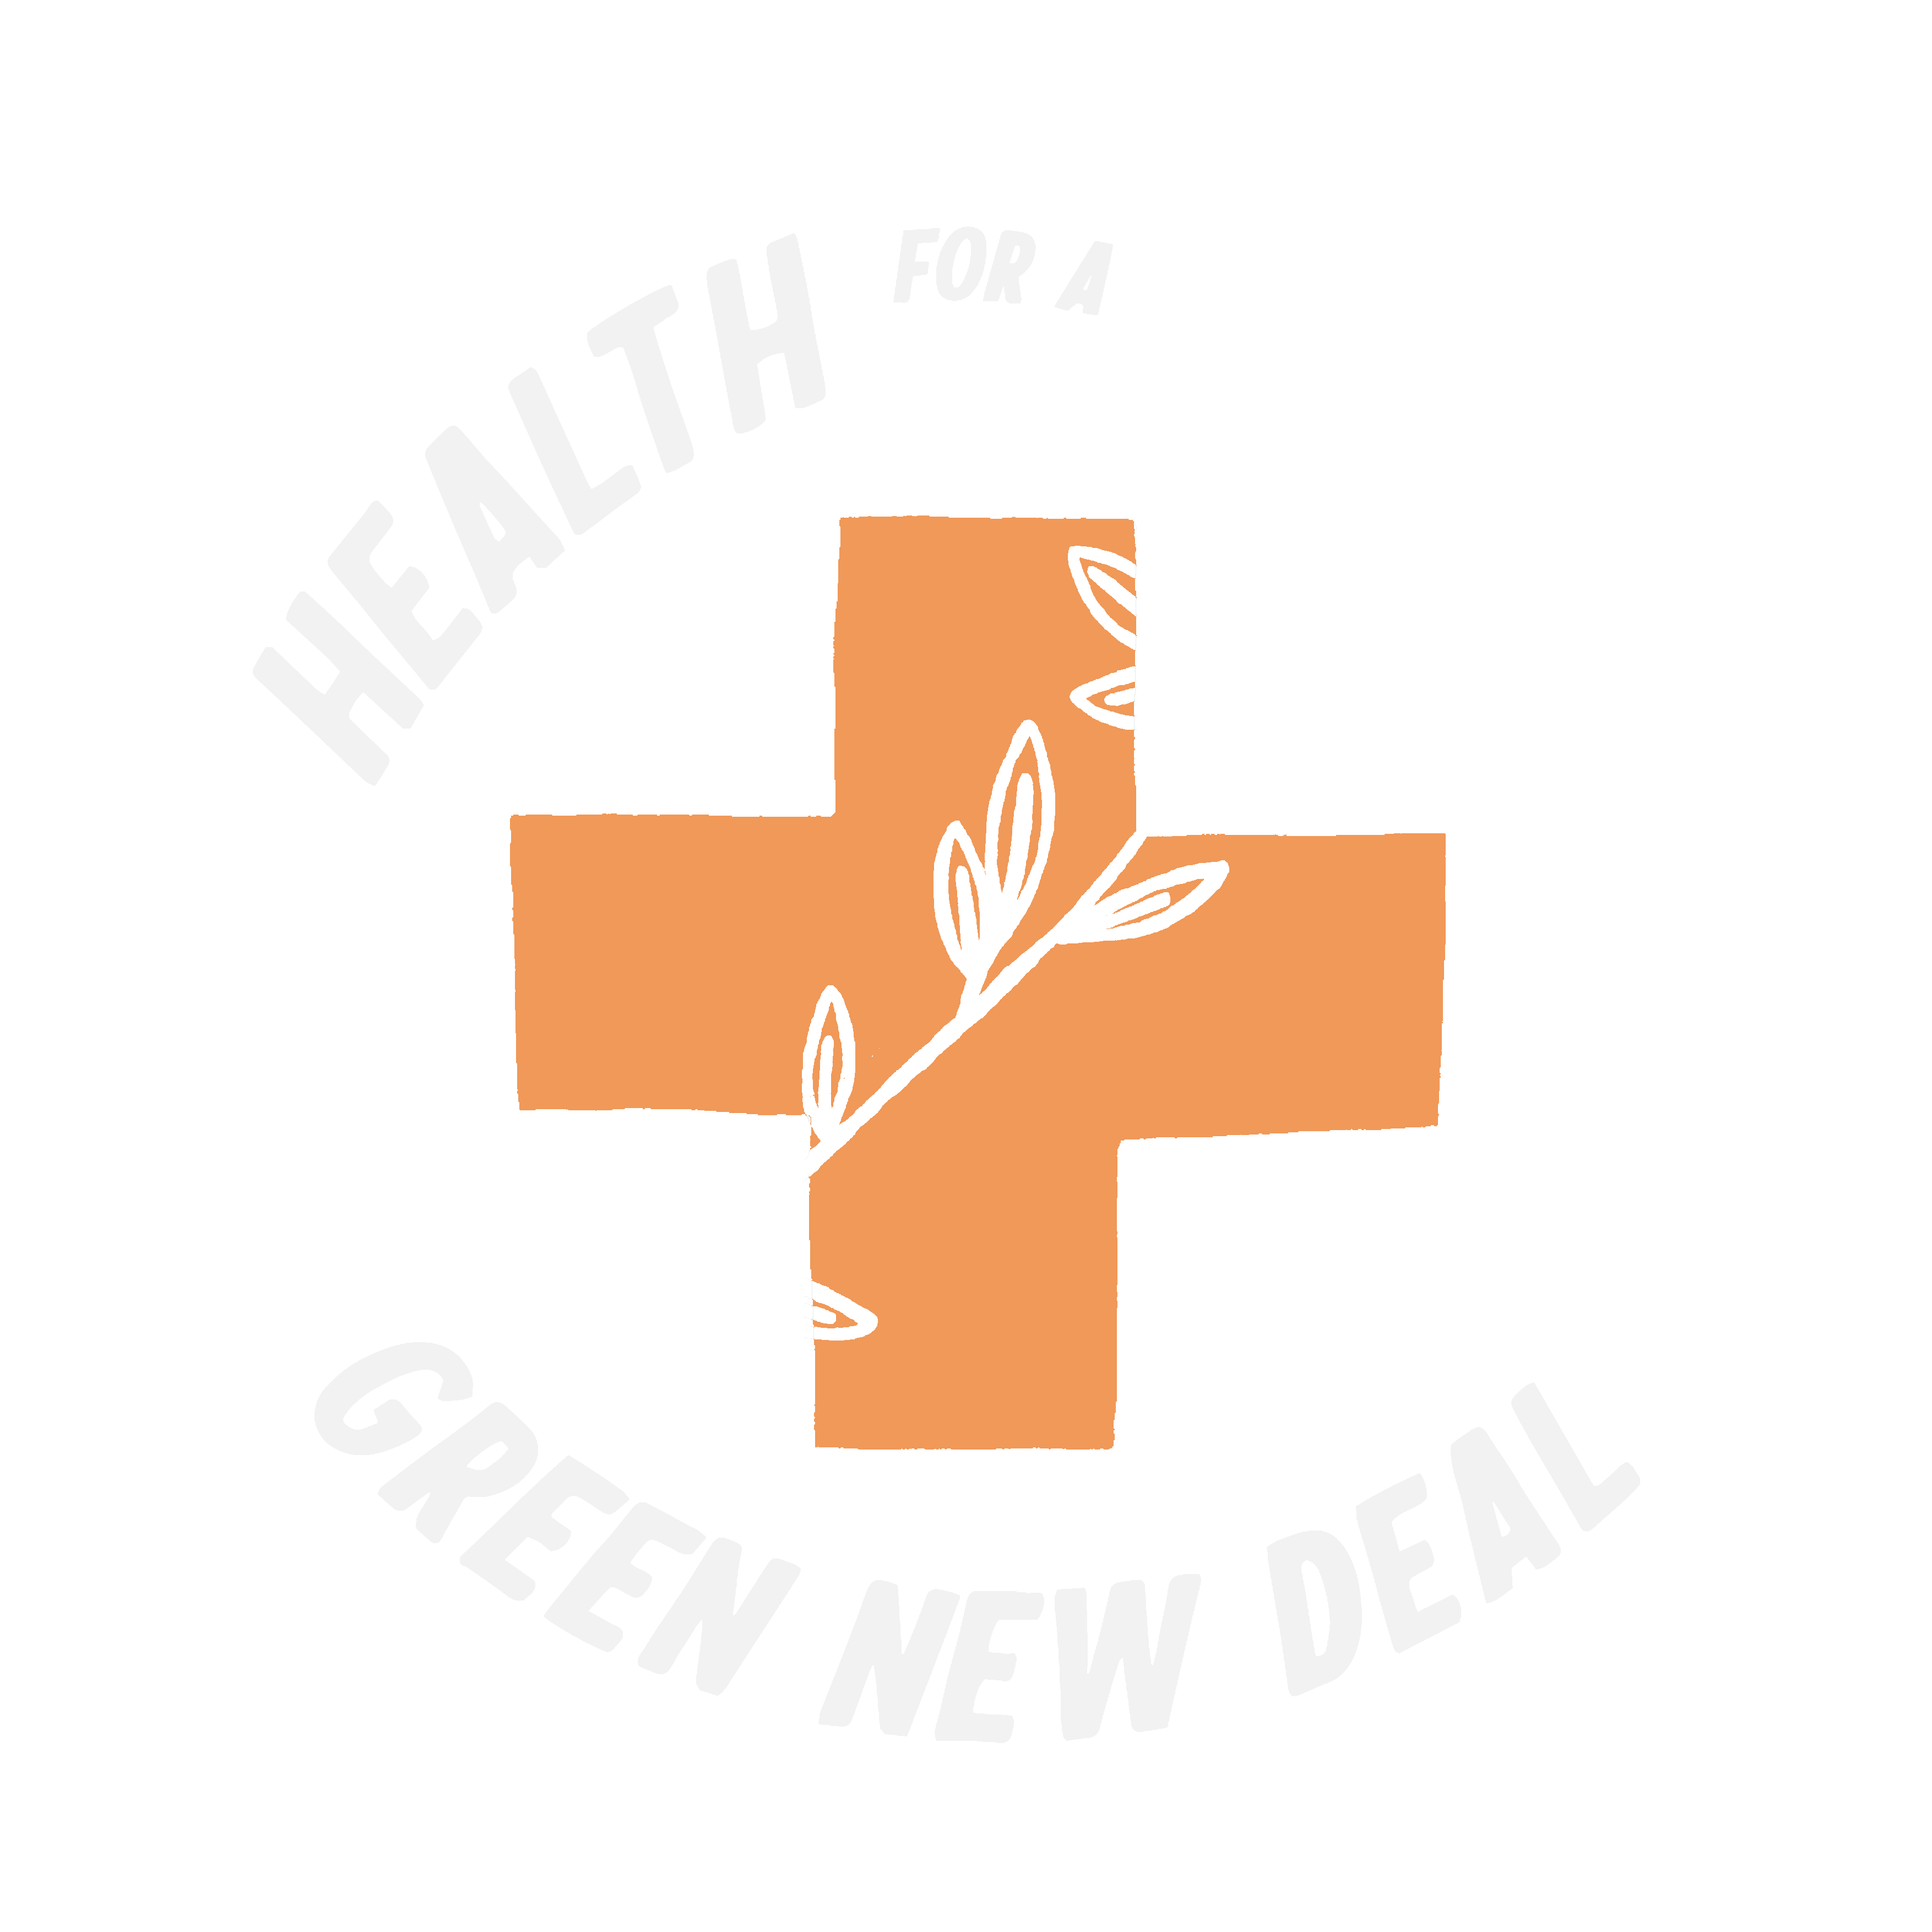 Health for a Green New Deal campaign logo - an orange flower over a medical cross